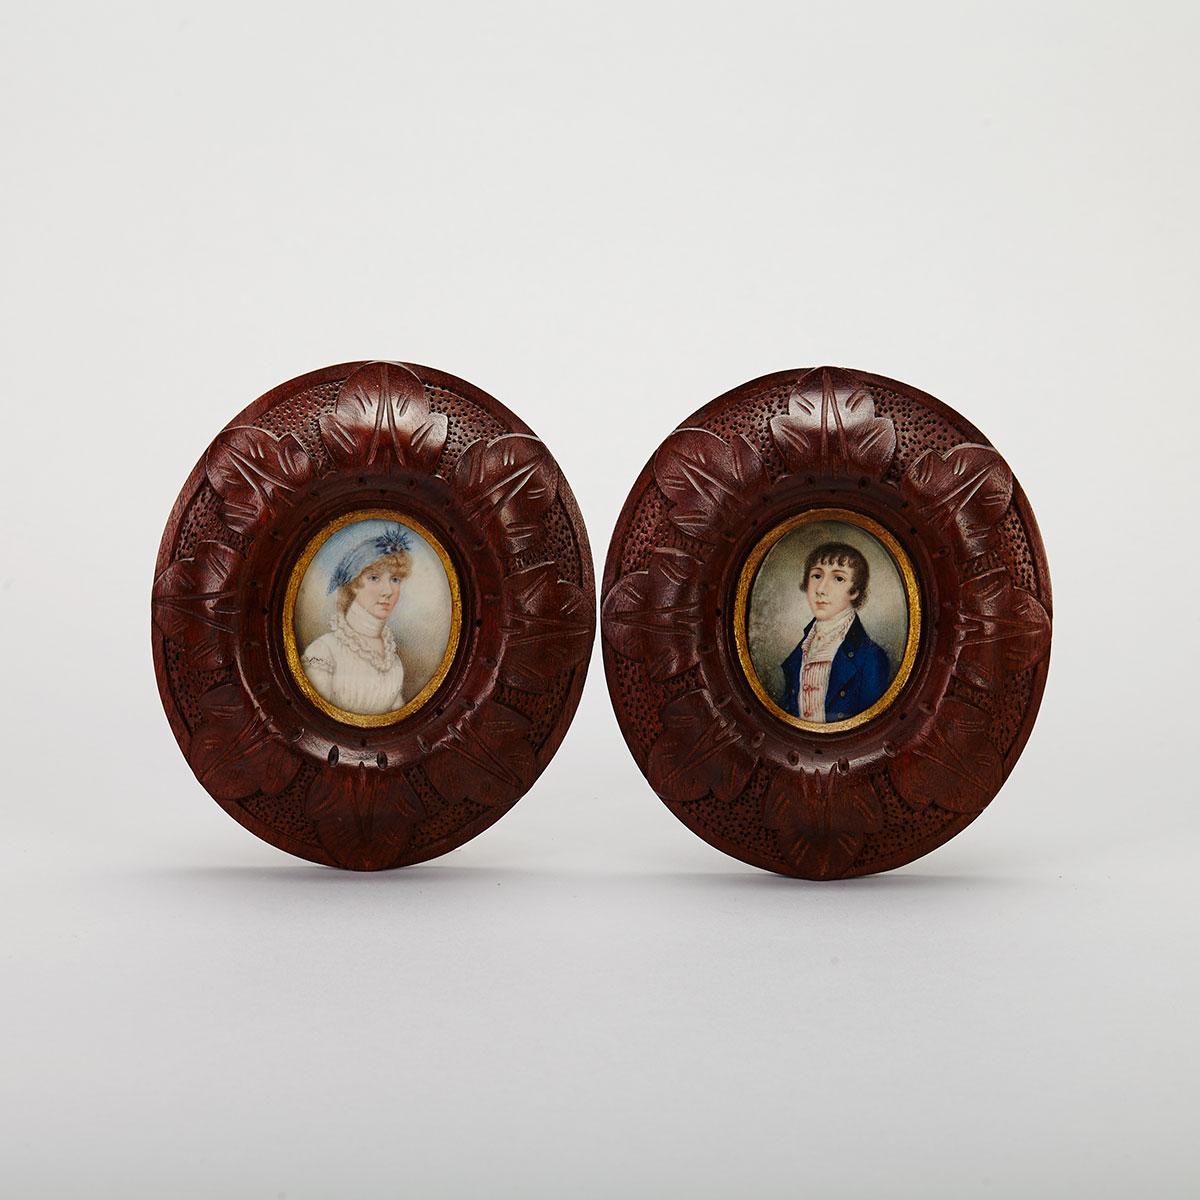 Pair of English Oval Portrait Minitures, early 19th century